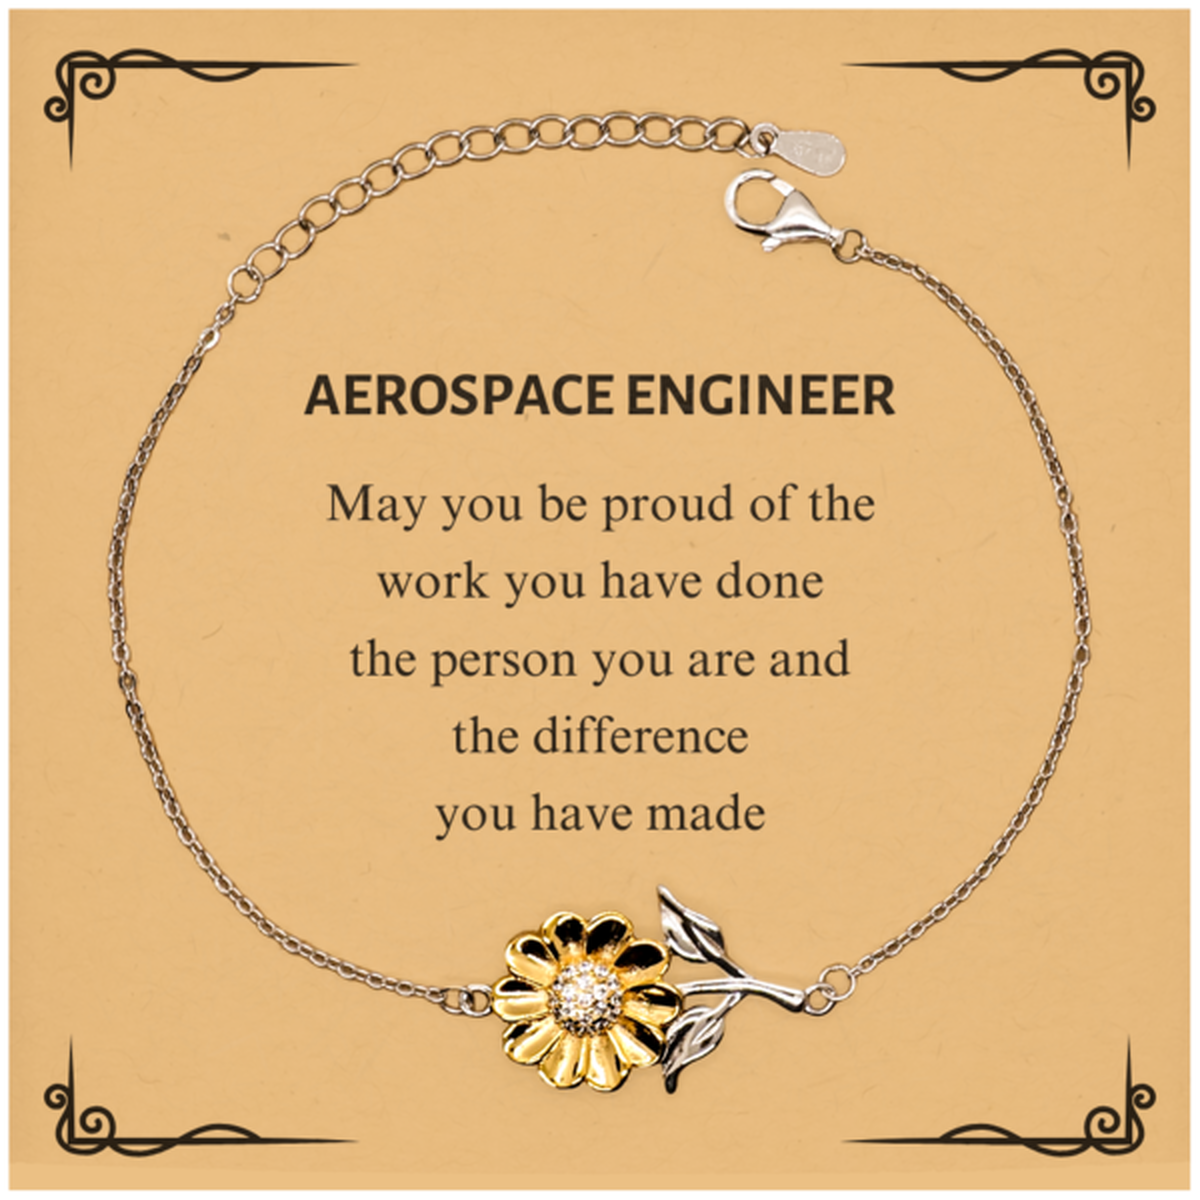 Aerospace Engineer May you be proud of the work you have done, Retirement Aerospace Engineer Sunflower Bracelet for Colleague Appreciation Gifts Amazing for Aerospace Engineer